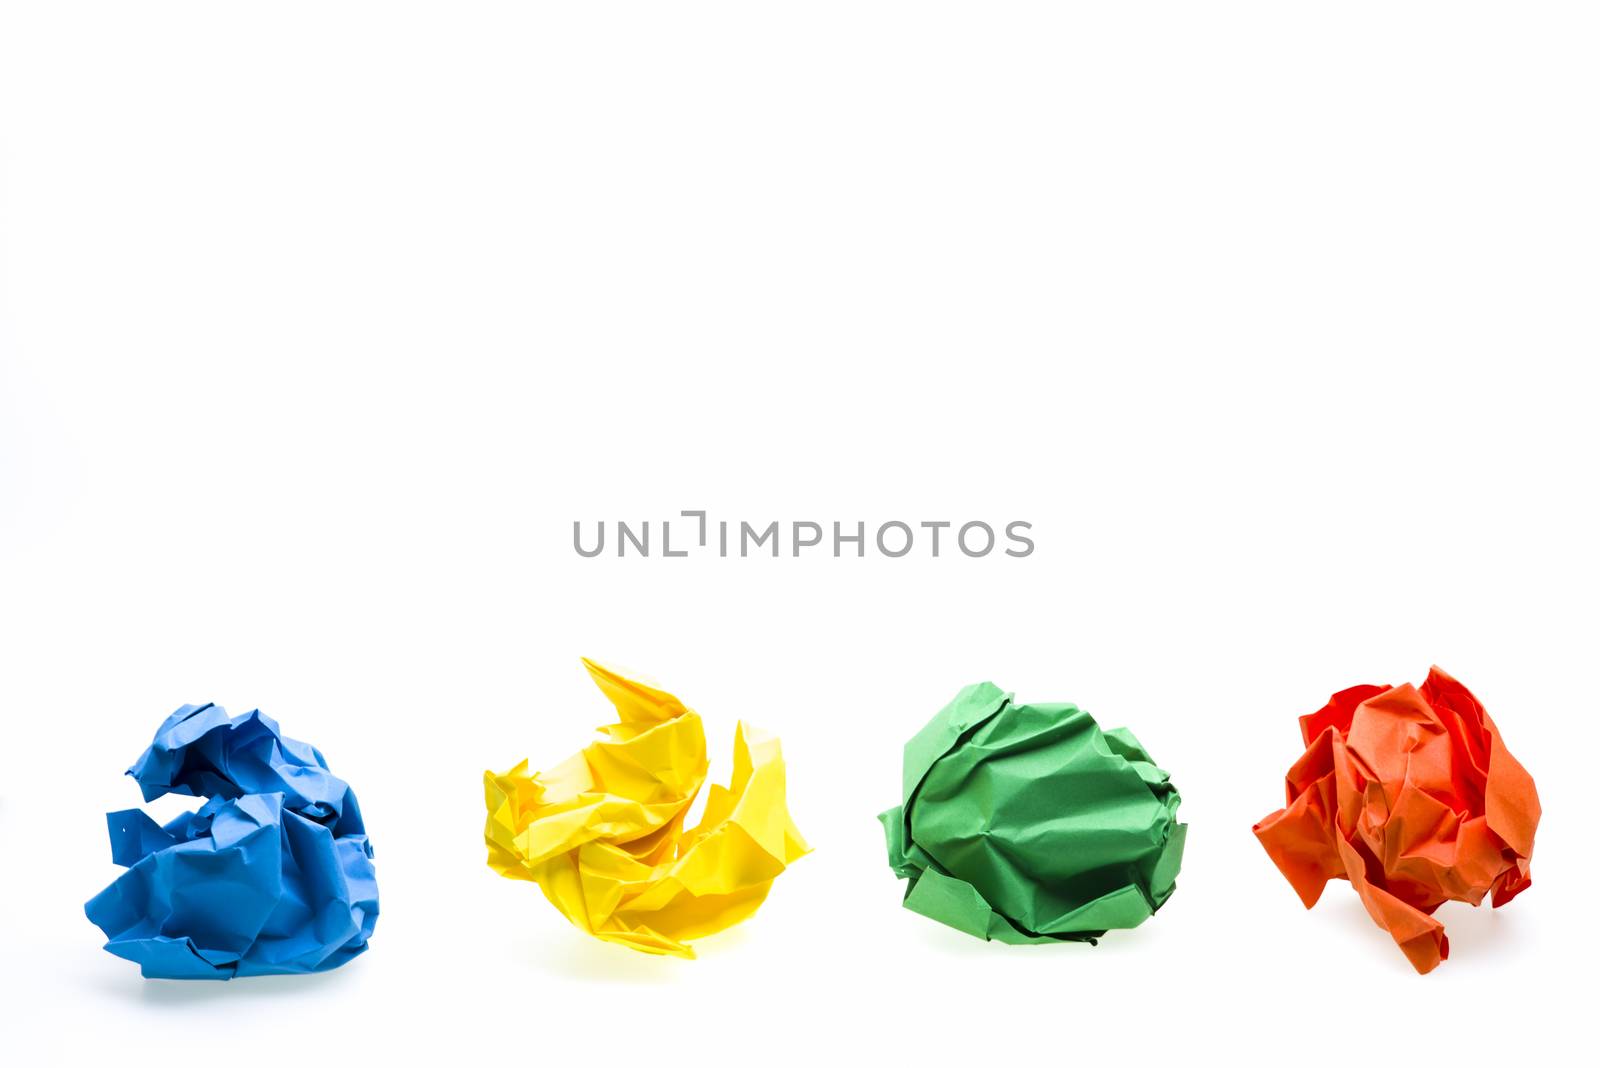 Colored crumpled paper ball by savcoco